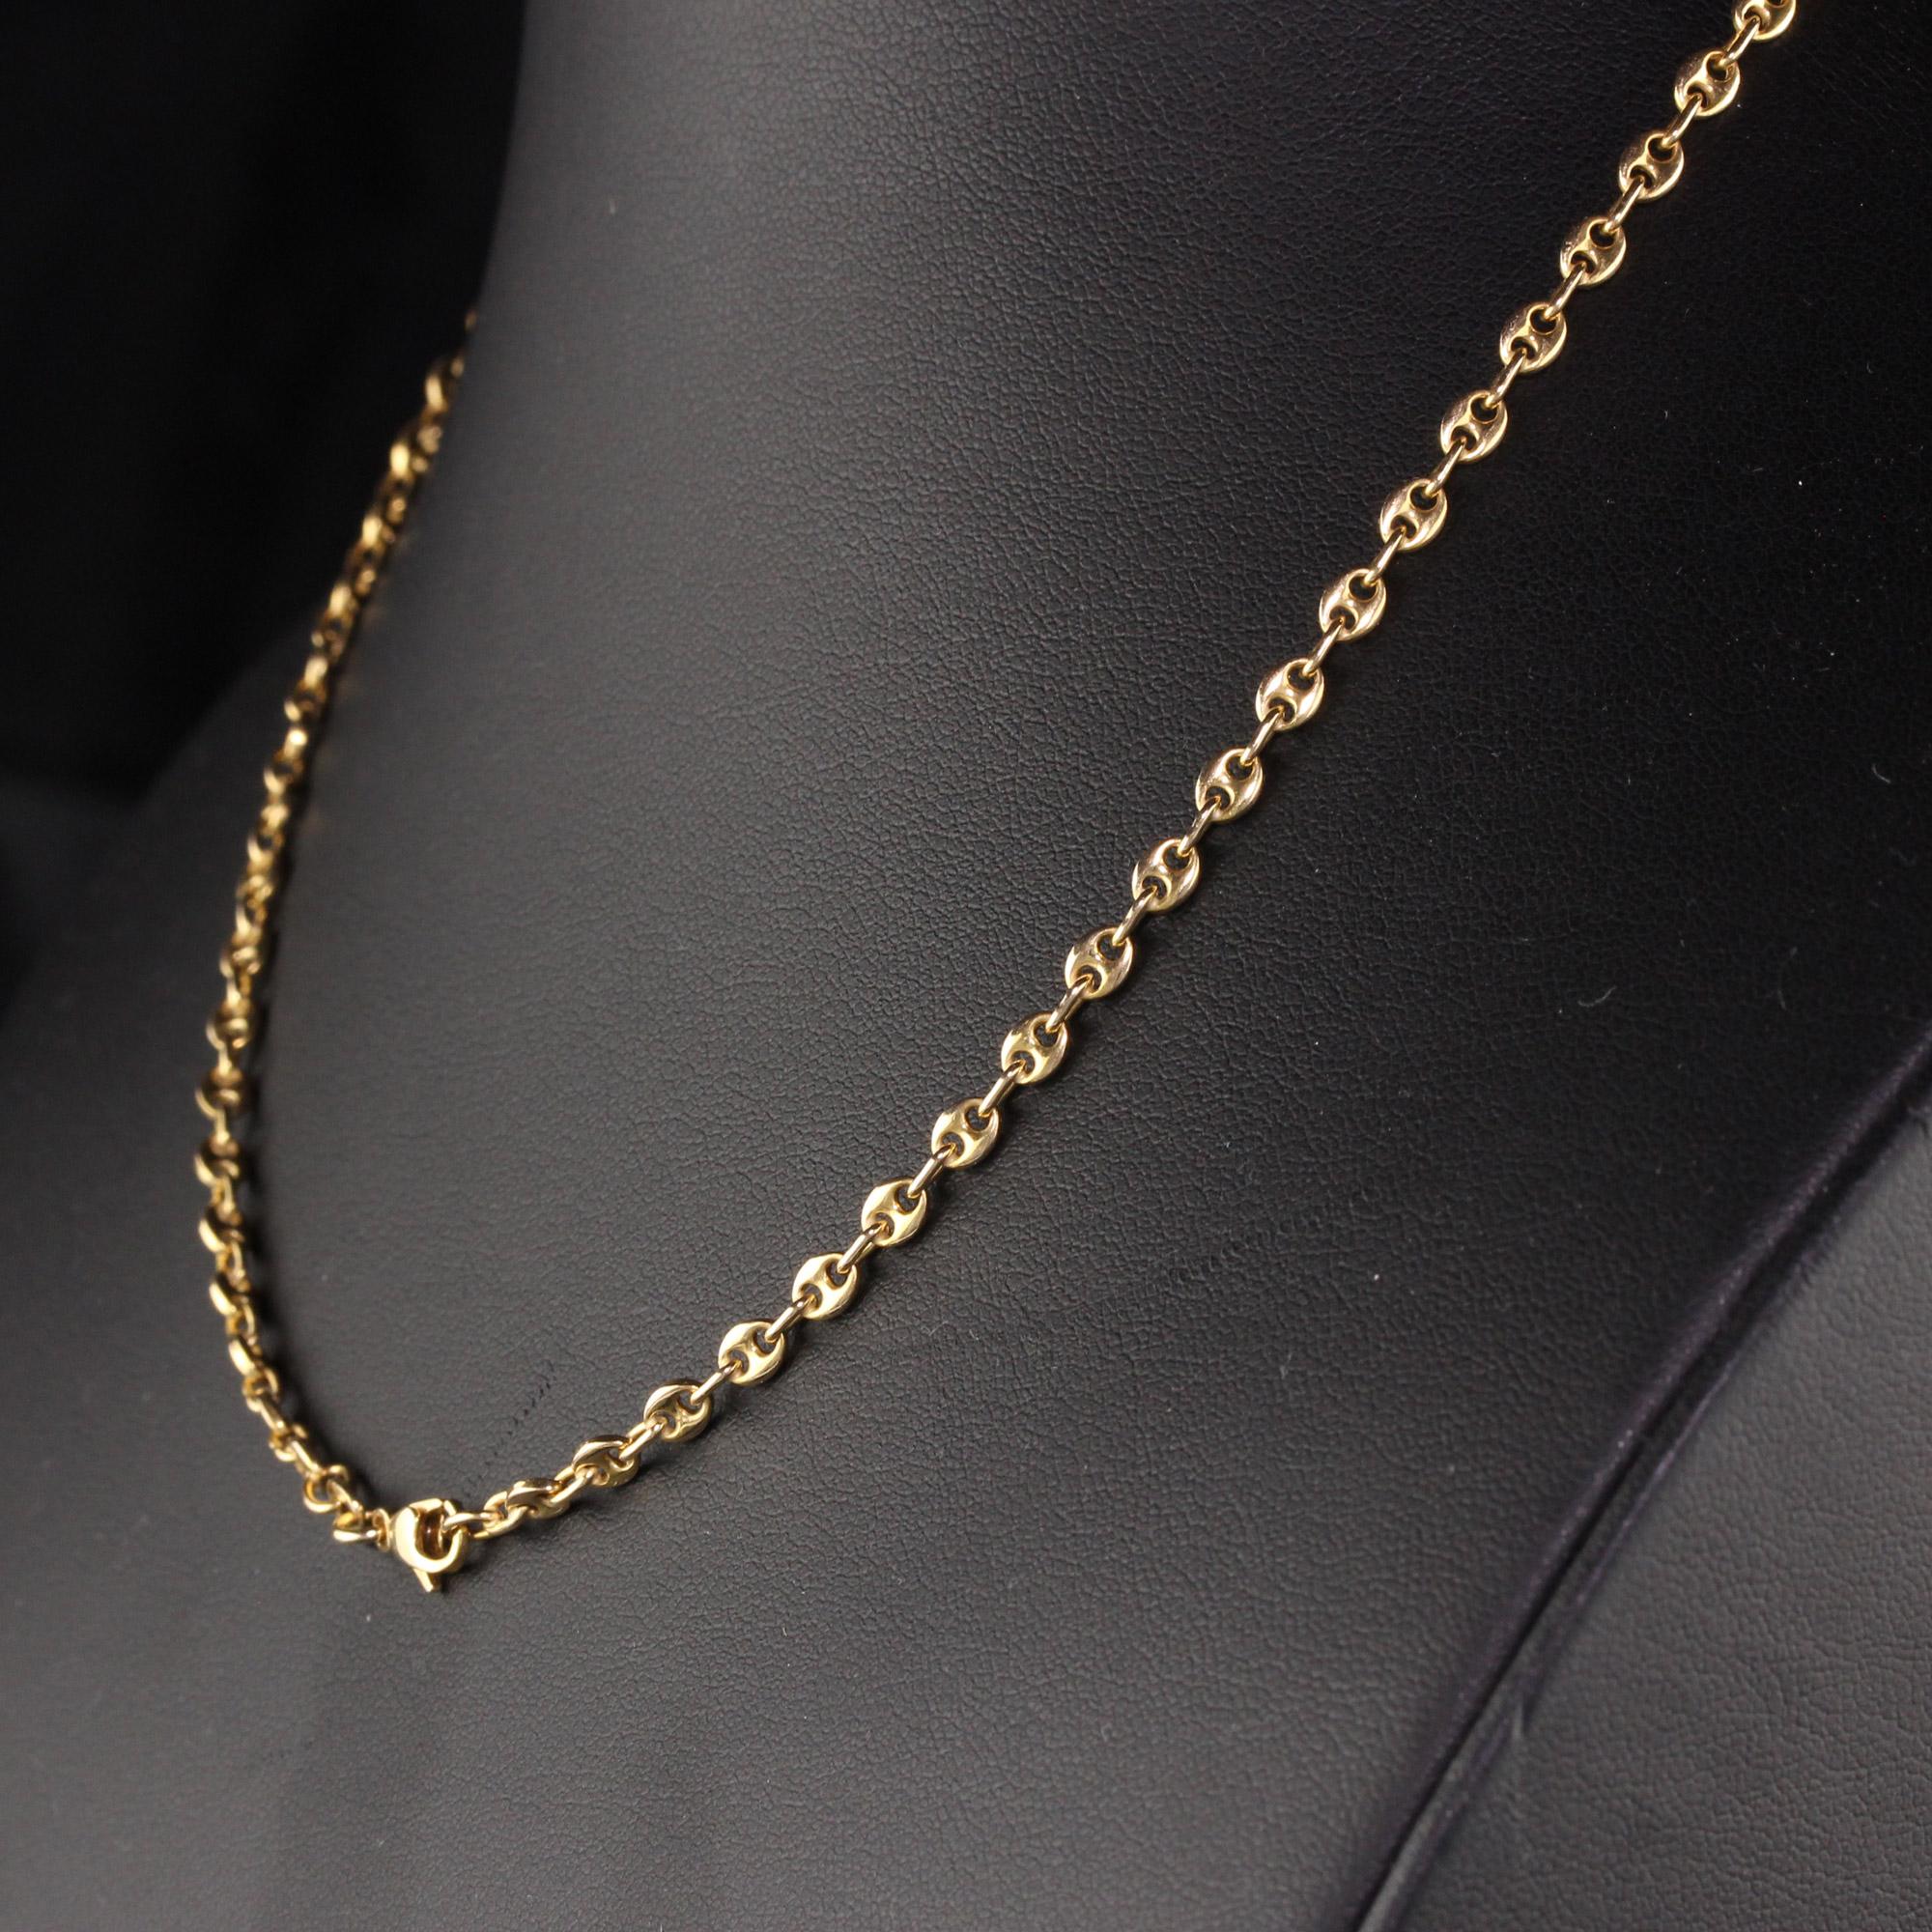 Women's or Men's Vintage Estate 18K Yellow Gold Gucci Style Link Necklace